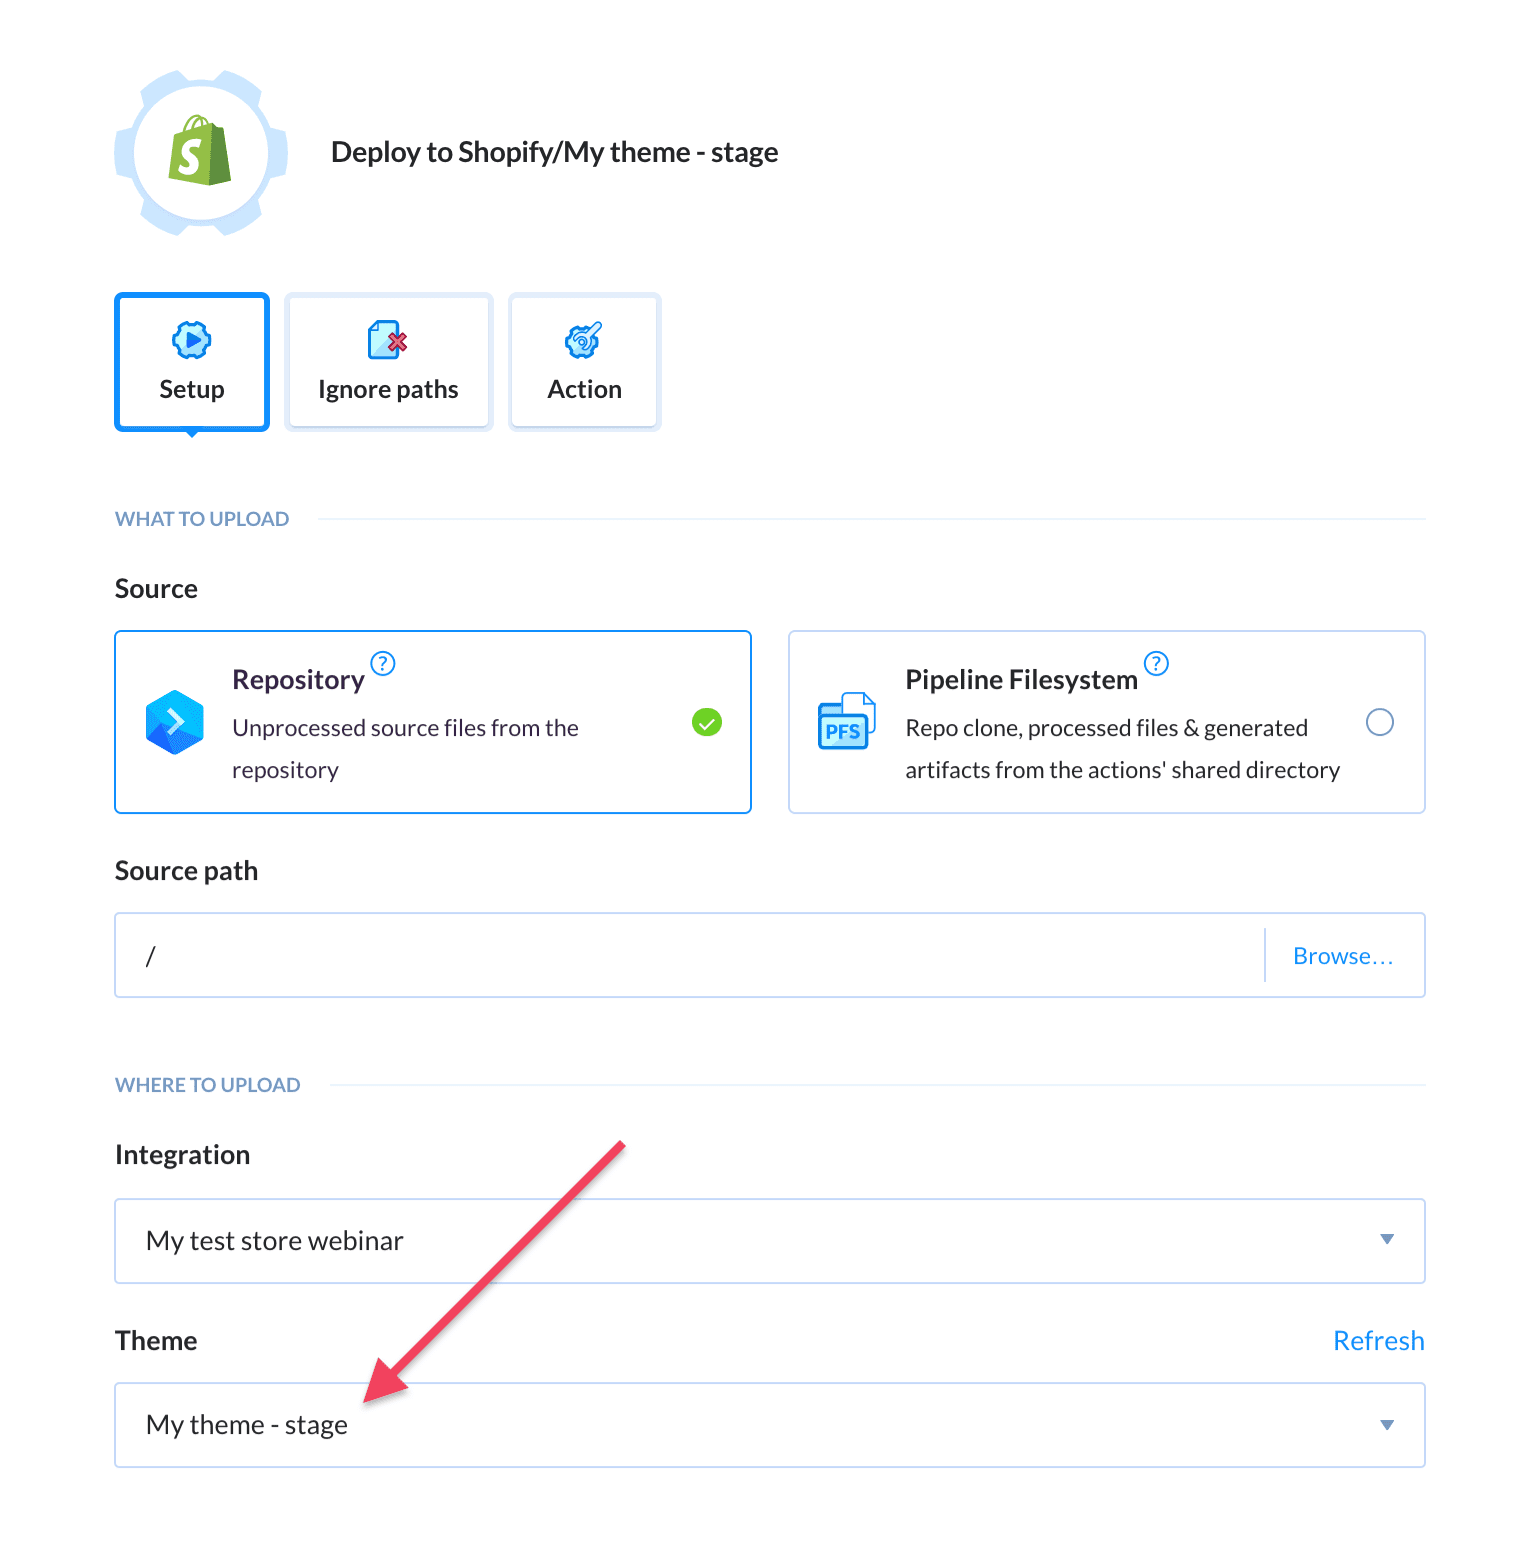 Configuring Shopify deployment